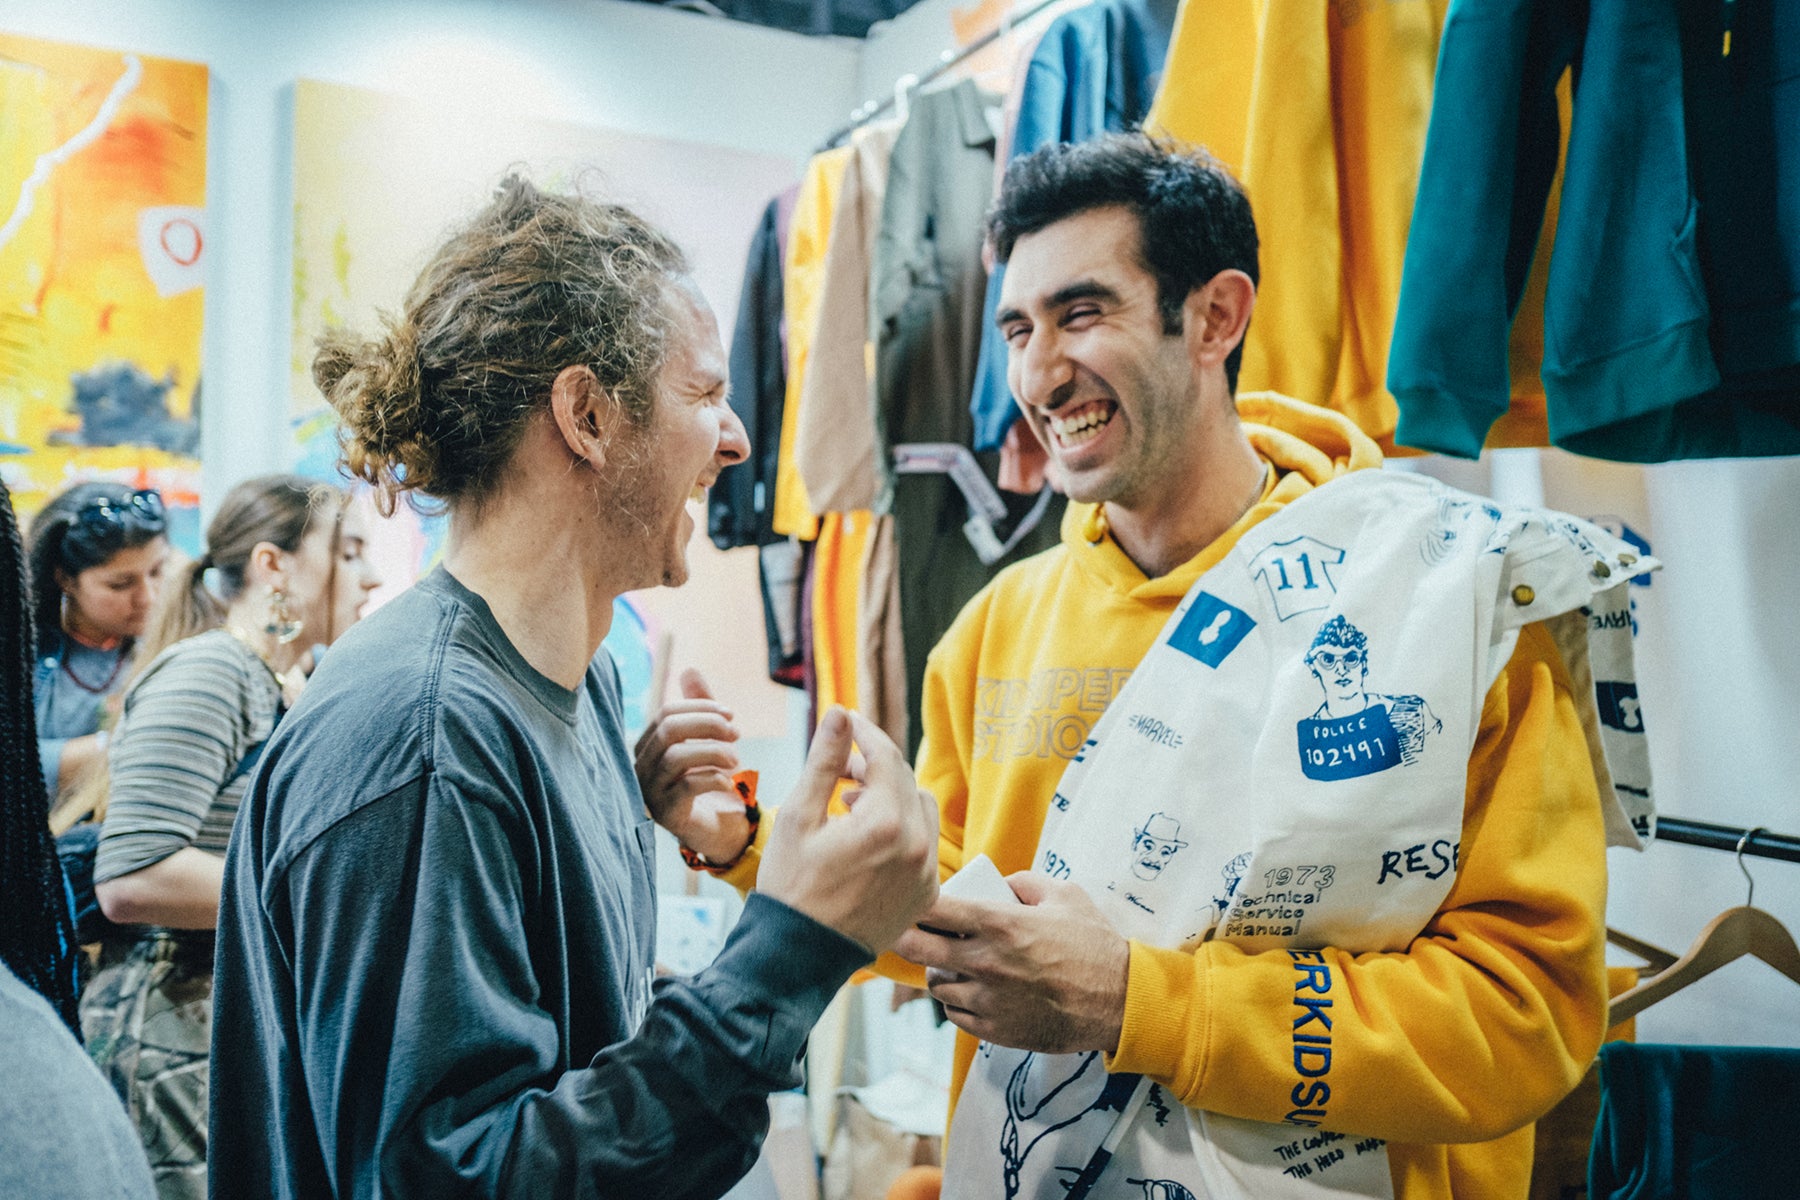 KidSuper designer Colm Dillane greeting a fan in his booth at Complexcon.  